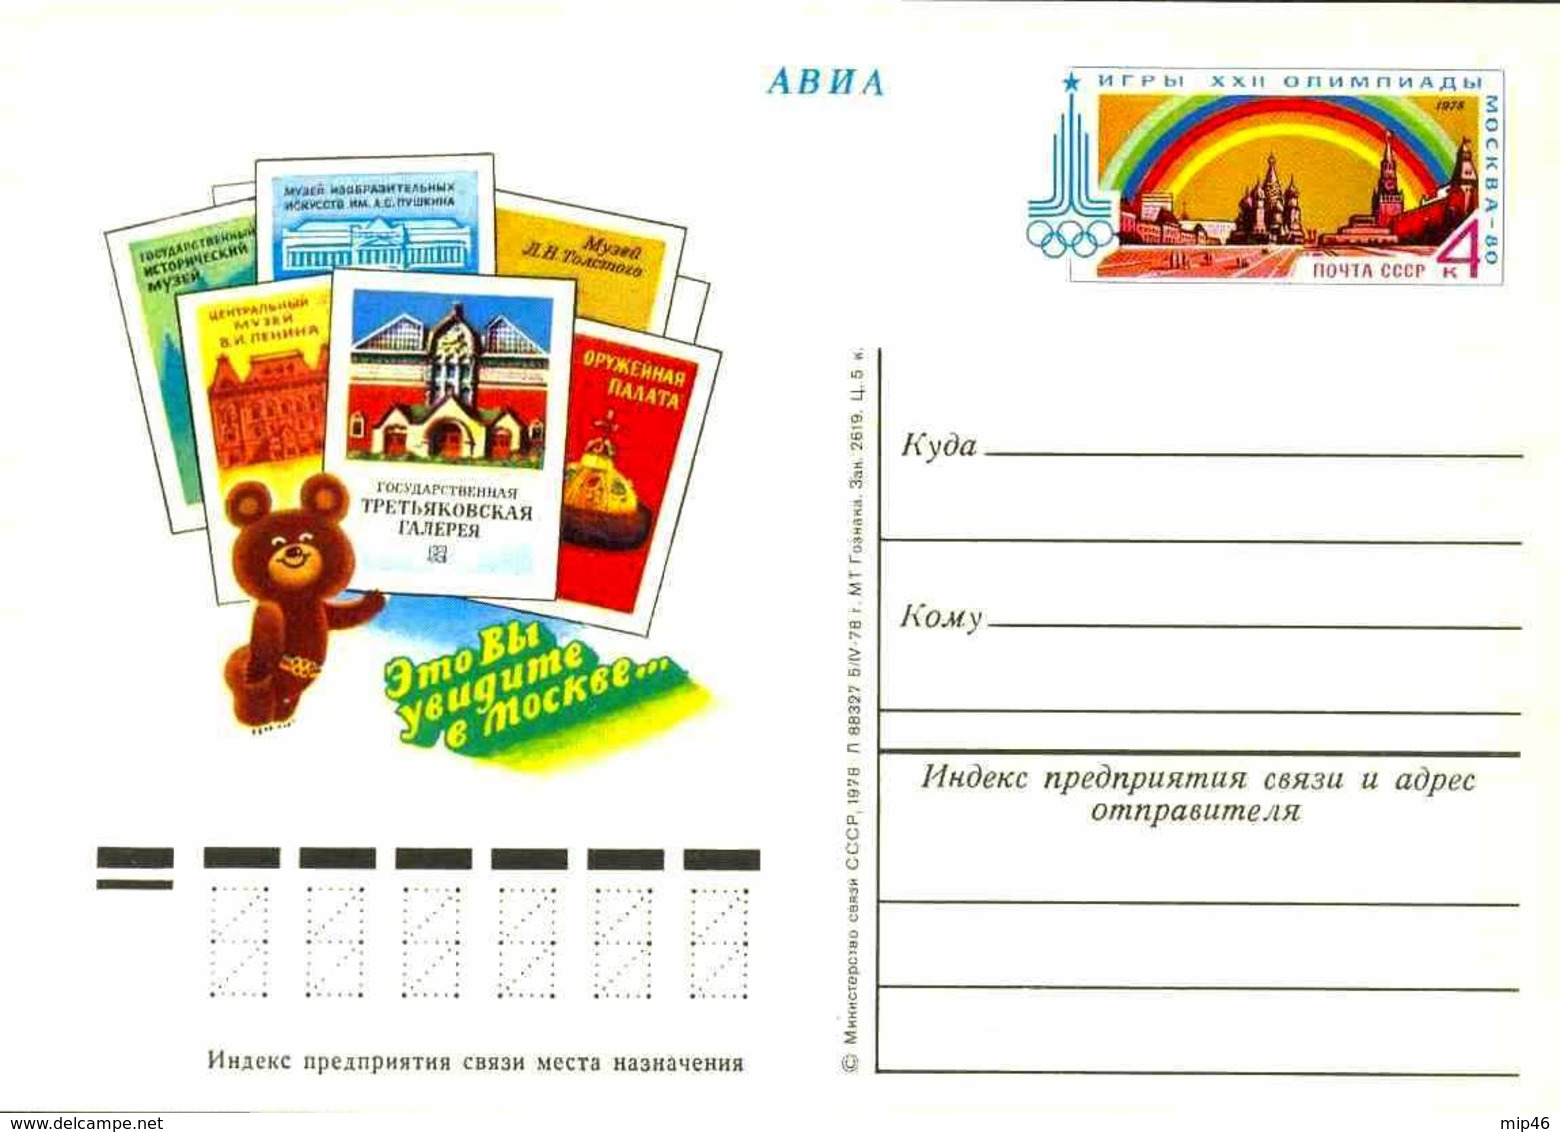 Postcards Russia / USSR - Olympic Games - Summer 1980: Moscow